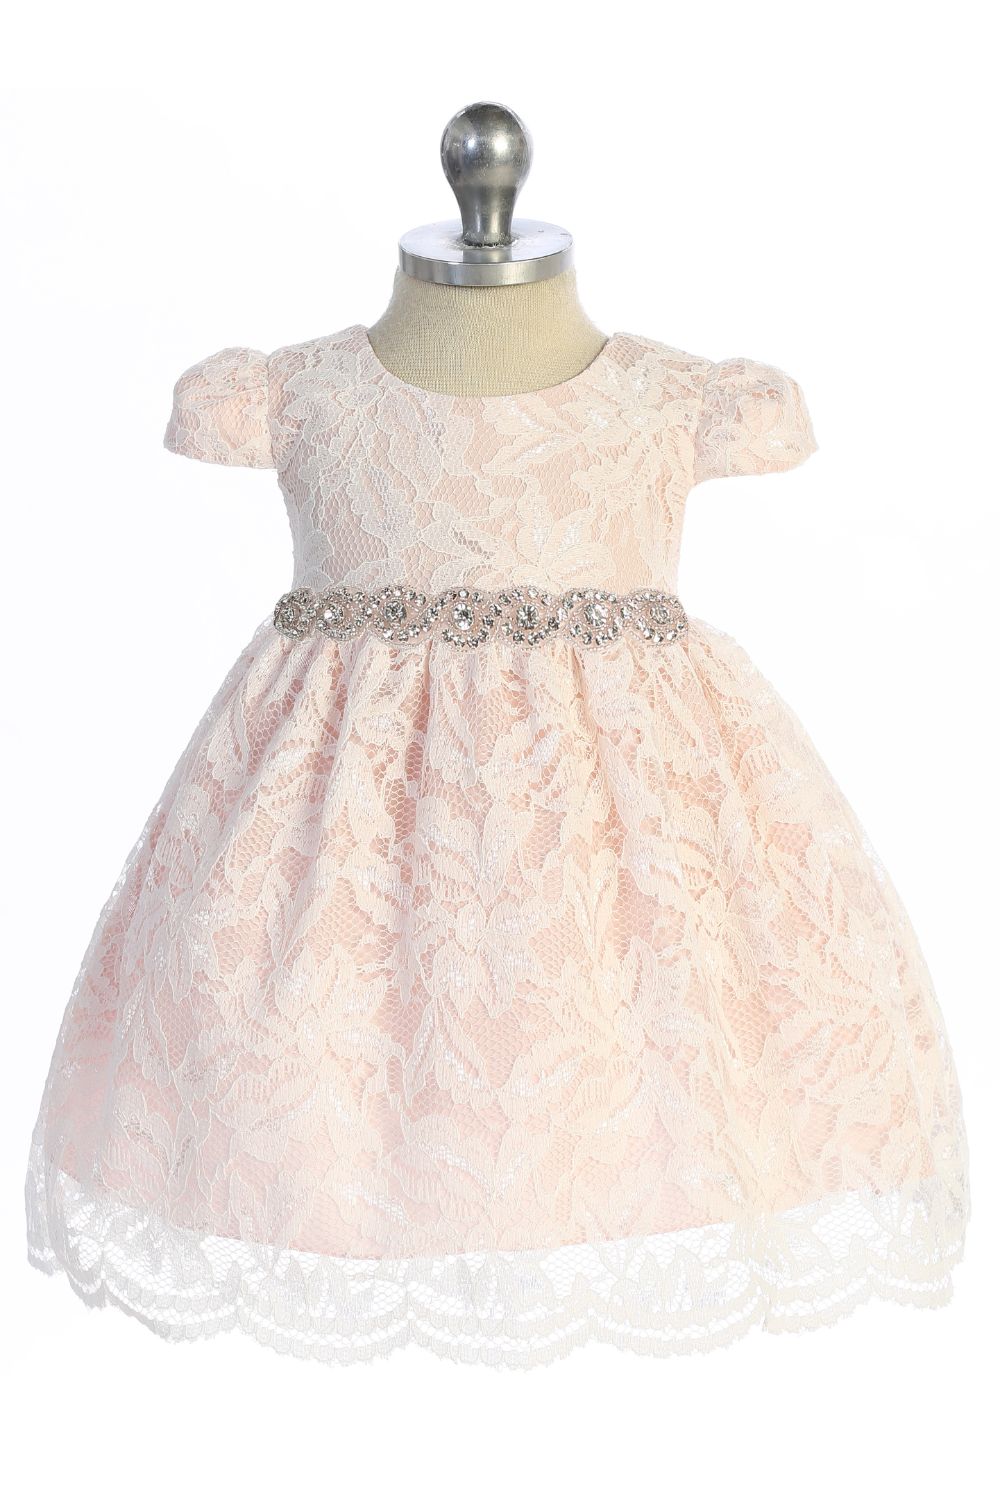 Baby Girl Lace V Back Bow Flower Dress - AS532-A Kids Dream